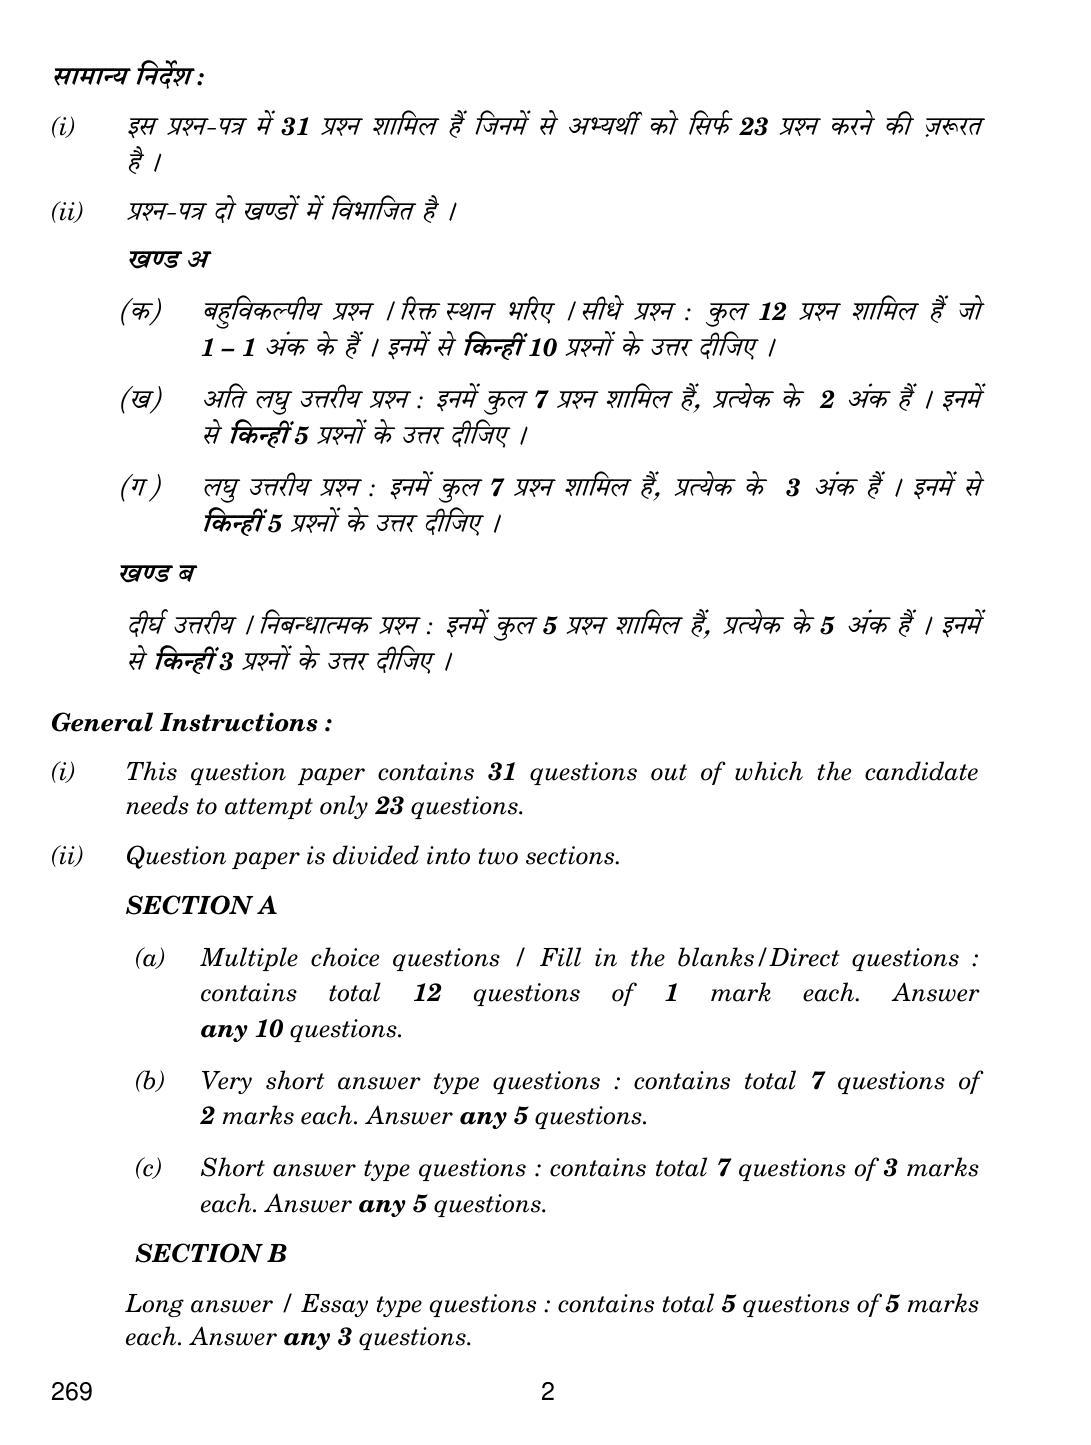 CBSE Class 12 269 BEAUTY AND HAIR 2019 Compartment Question Paper - Page 2